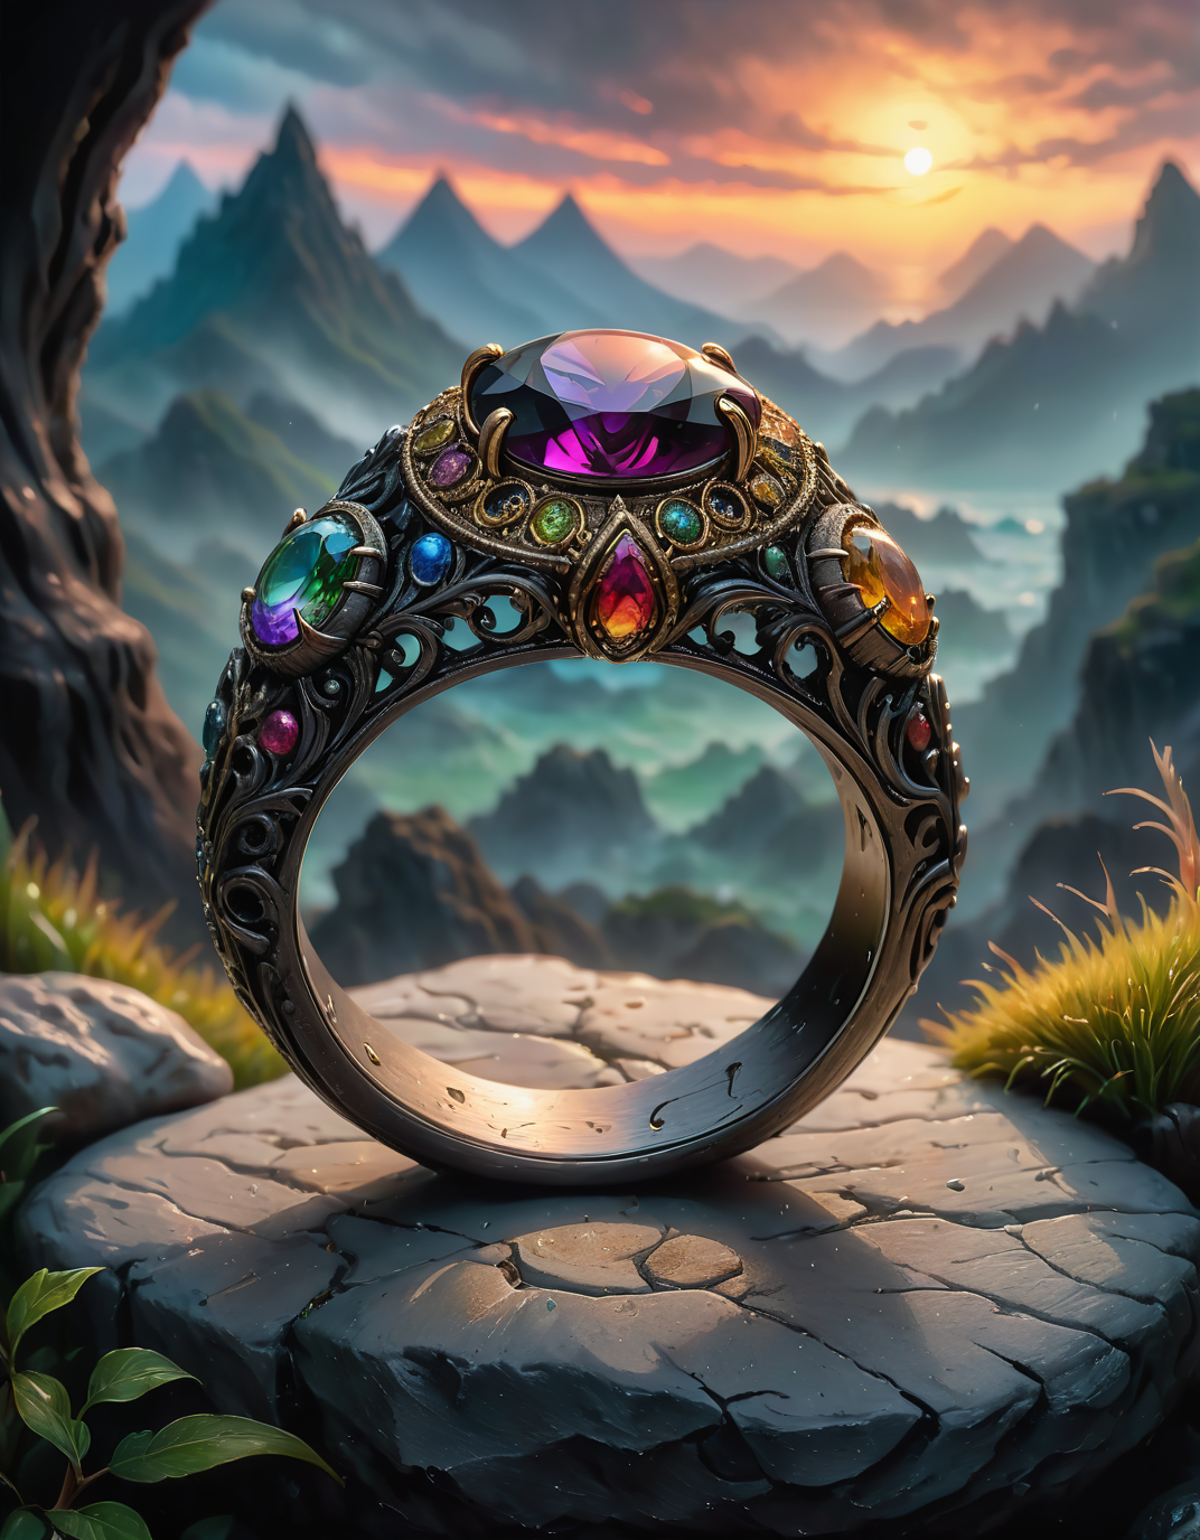 A Fantasy Ring with Gems and Precious Stones Sitting on Rocks in Nature.